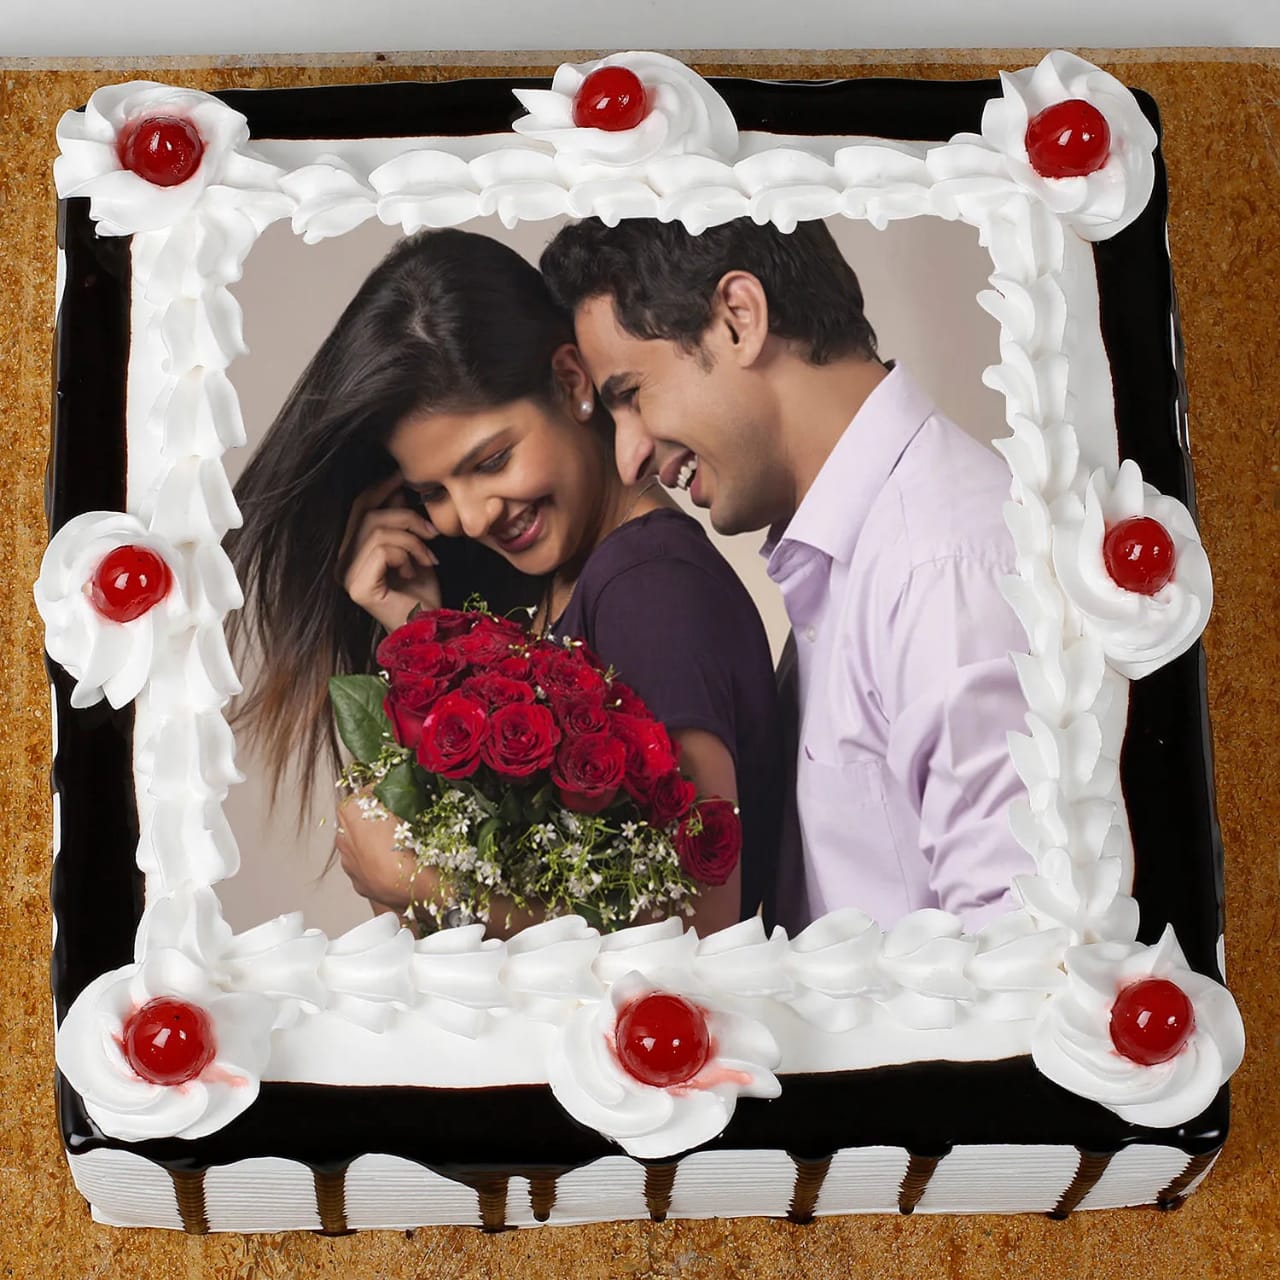 3D Square Cake in Karur at best price by SRM Sweets & Cakes - Justdial